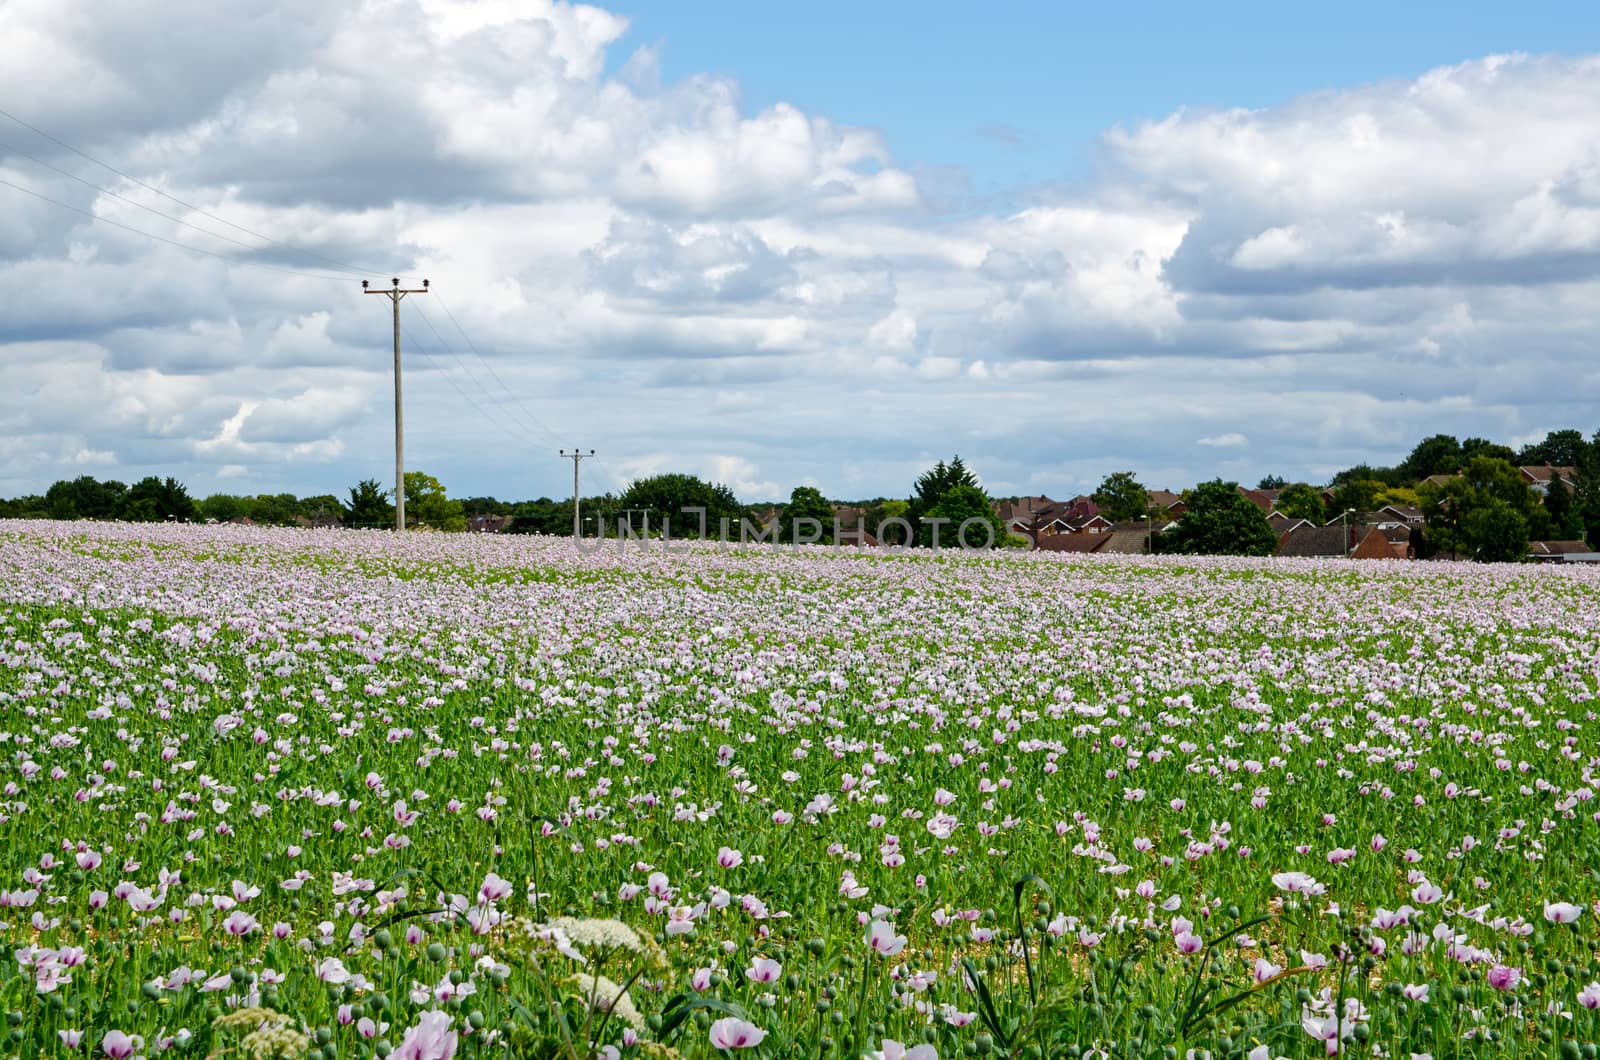 A field of cultivated opium poppies growing in Basingstoke, Hampshire.